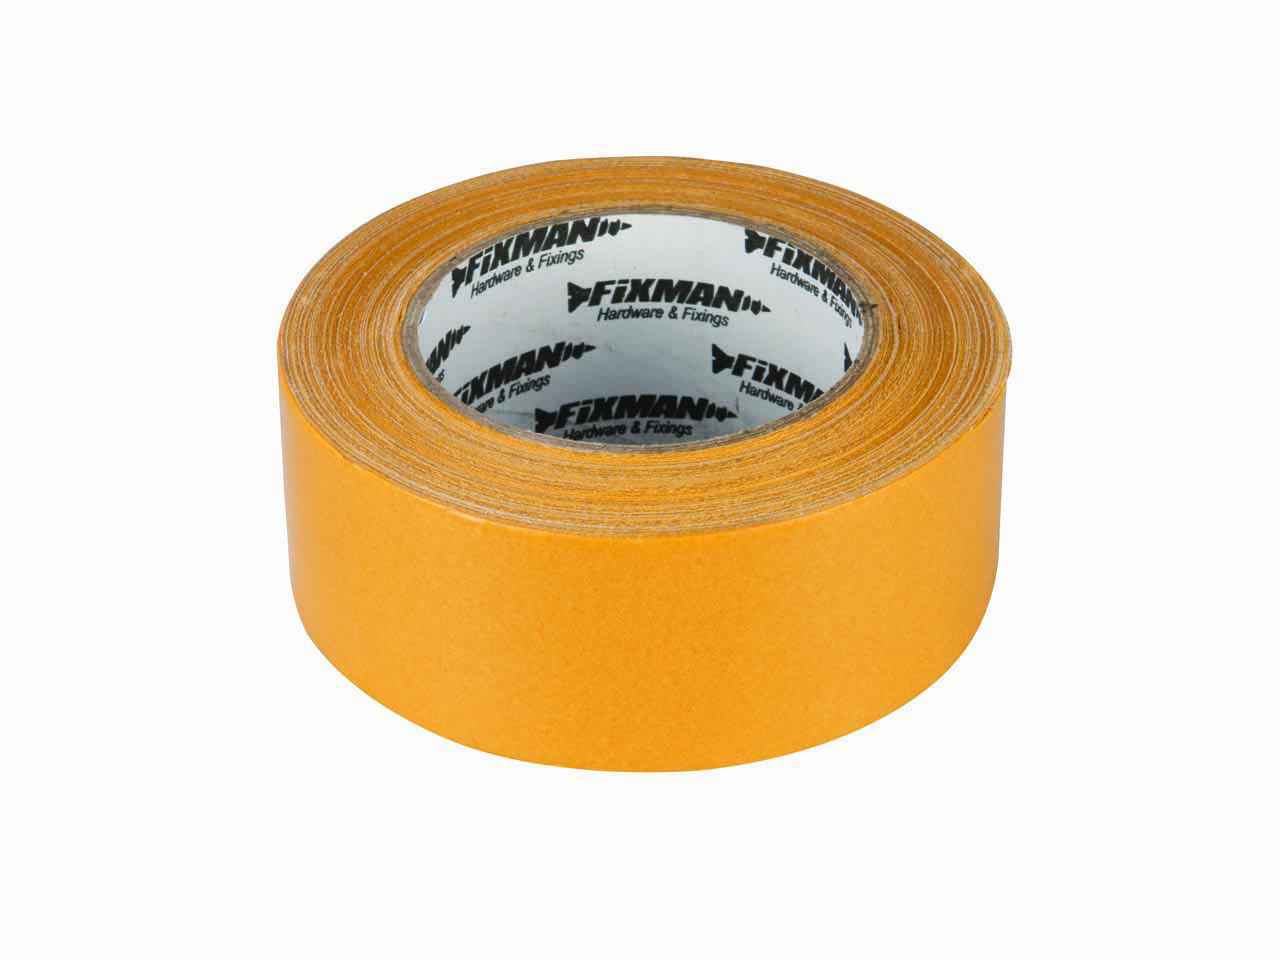 Silverline Fixman Double Sided Tape 50mm x 33mm 198134, Strong, fibreglass-reinforced, permanent double-sided tape . \ Toolforce